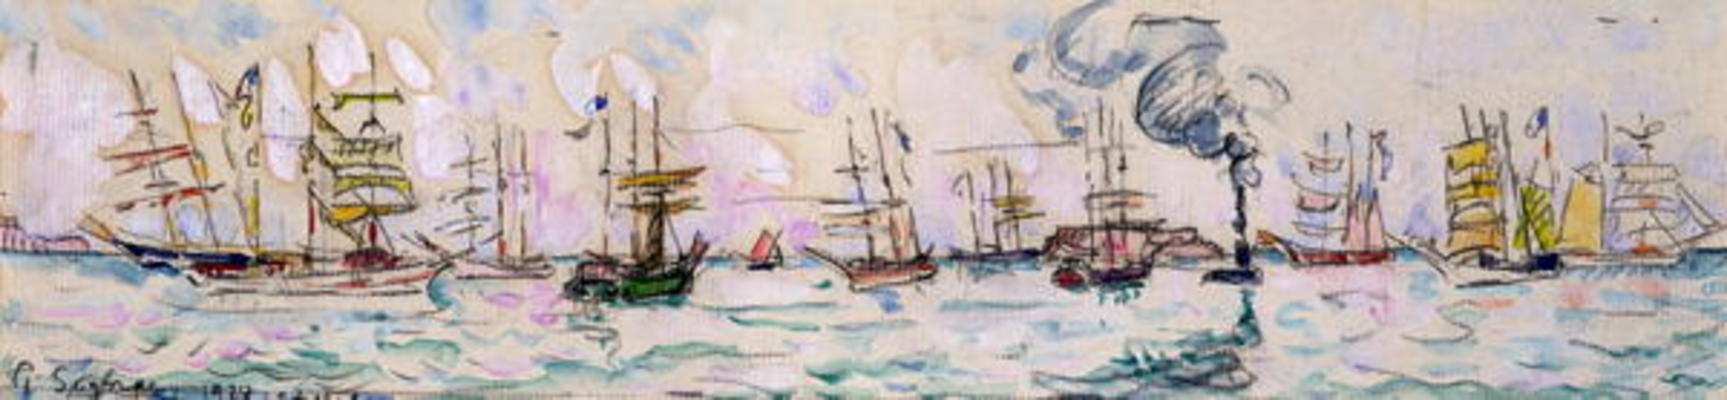 The Departure of the Fishing Trawlers to Newfoundland, 1928 (w/c on paper) from Paul Signac